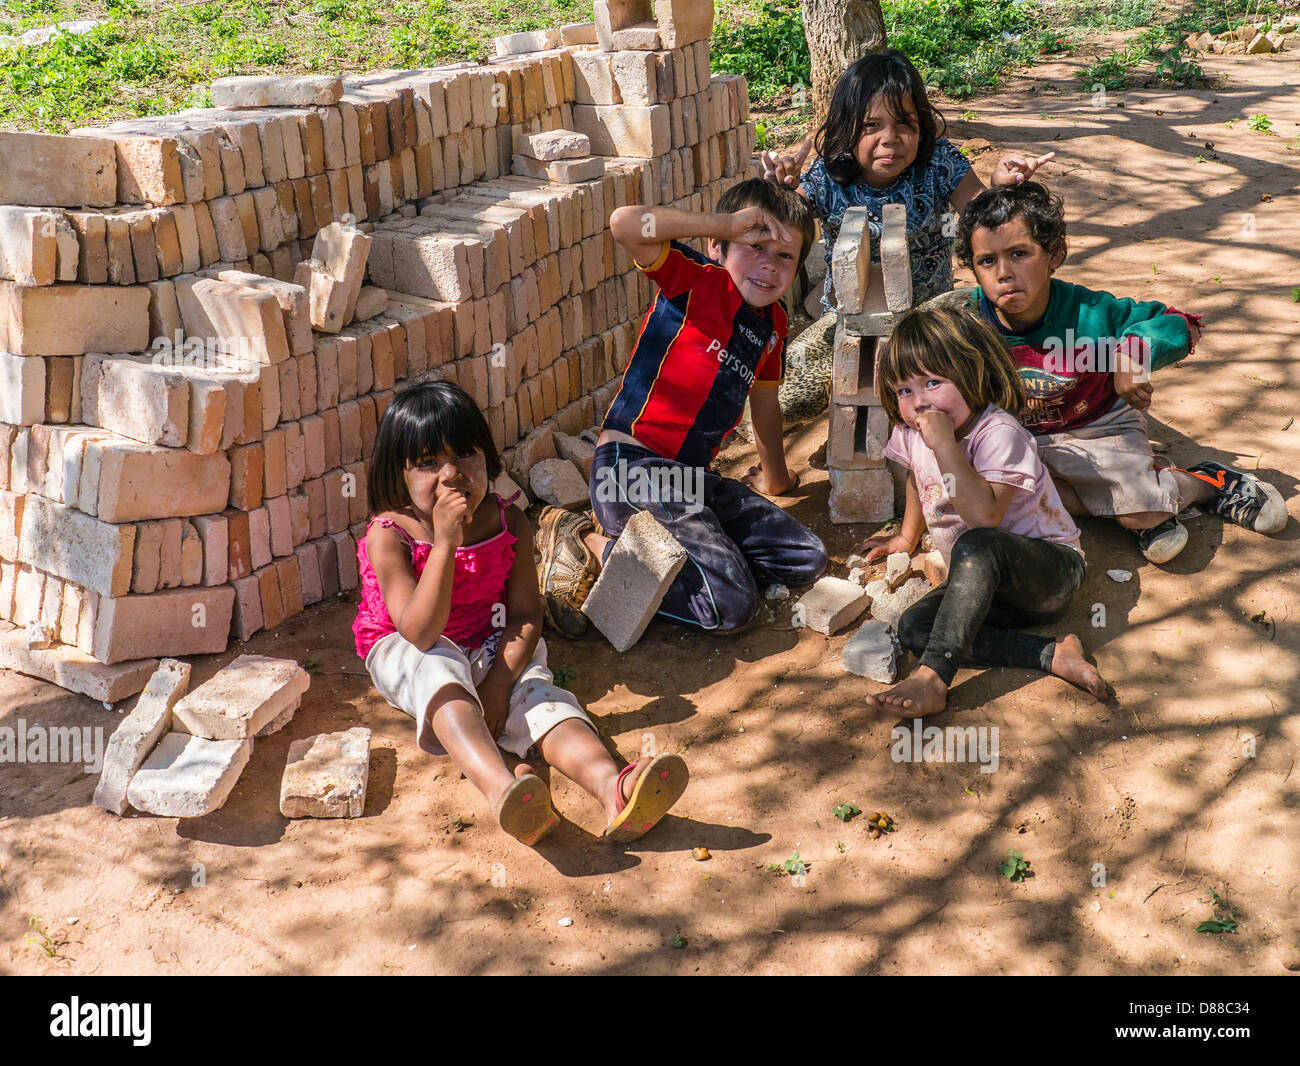 Five Hispanic children play with bricks near a Habitat for Humanity site in Luque, Paraguay. Stock Photo